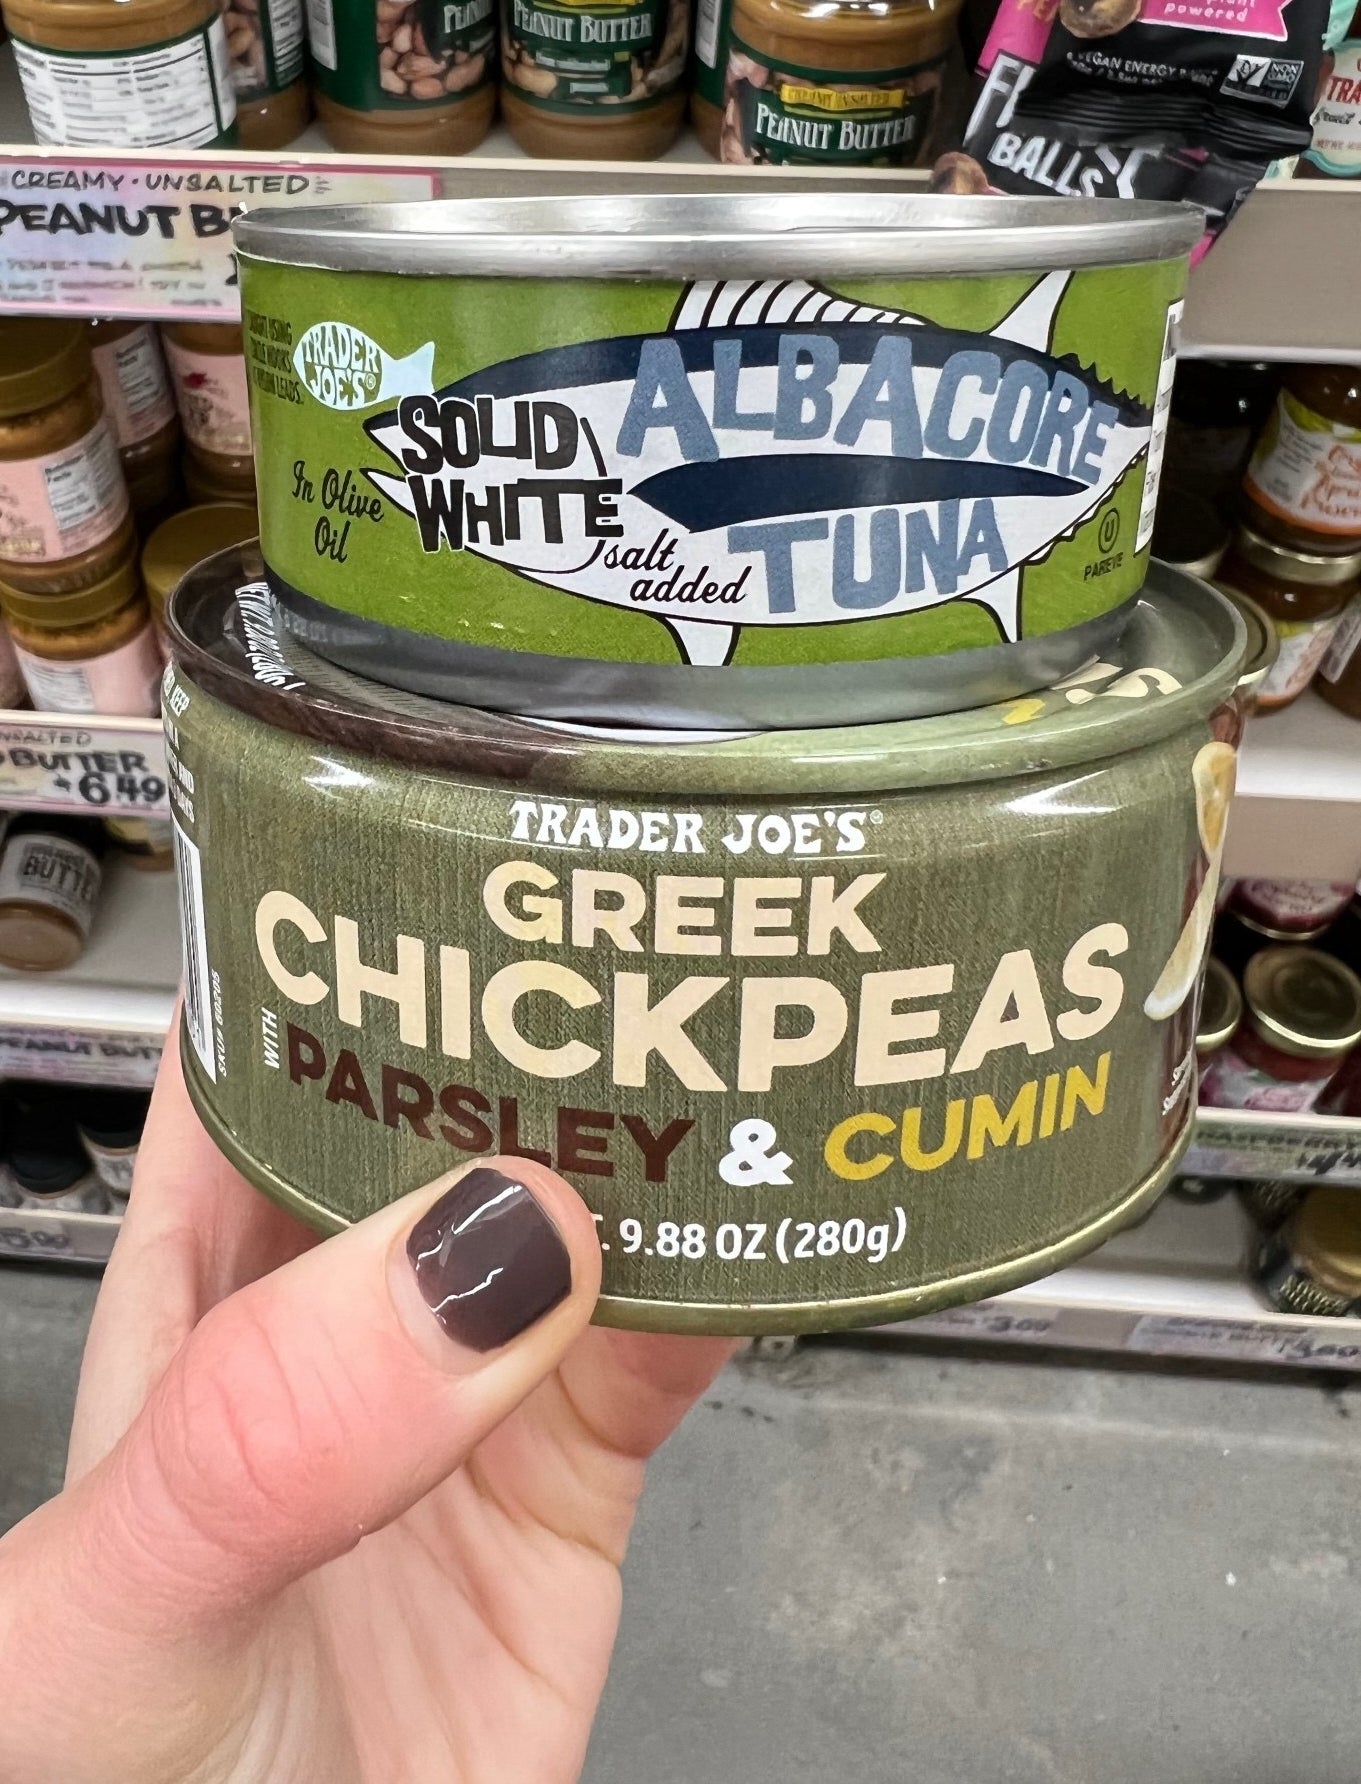 A can of tuna fish and a can of chickpeas.